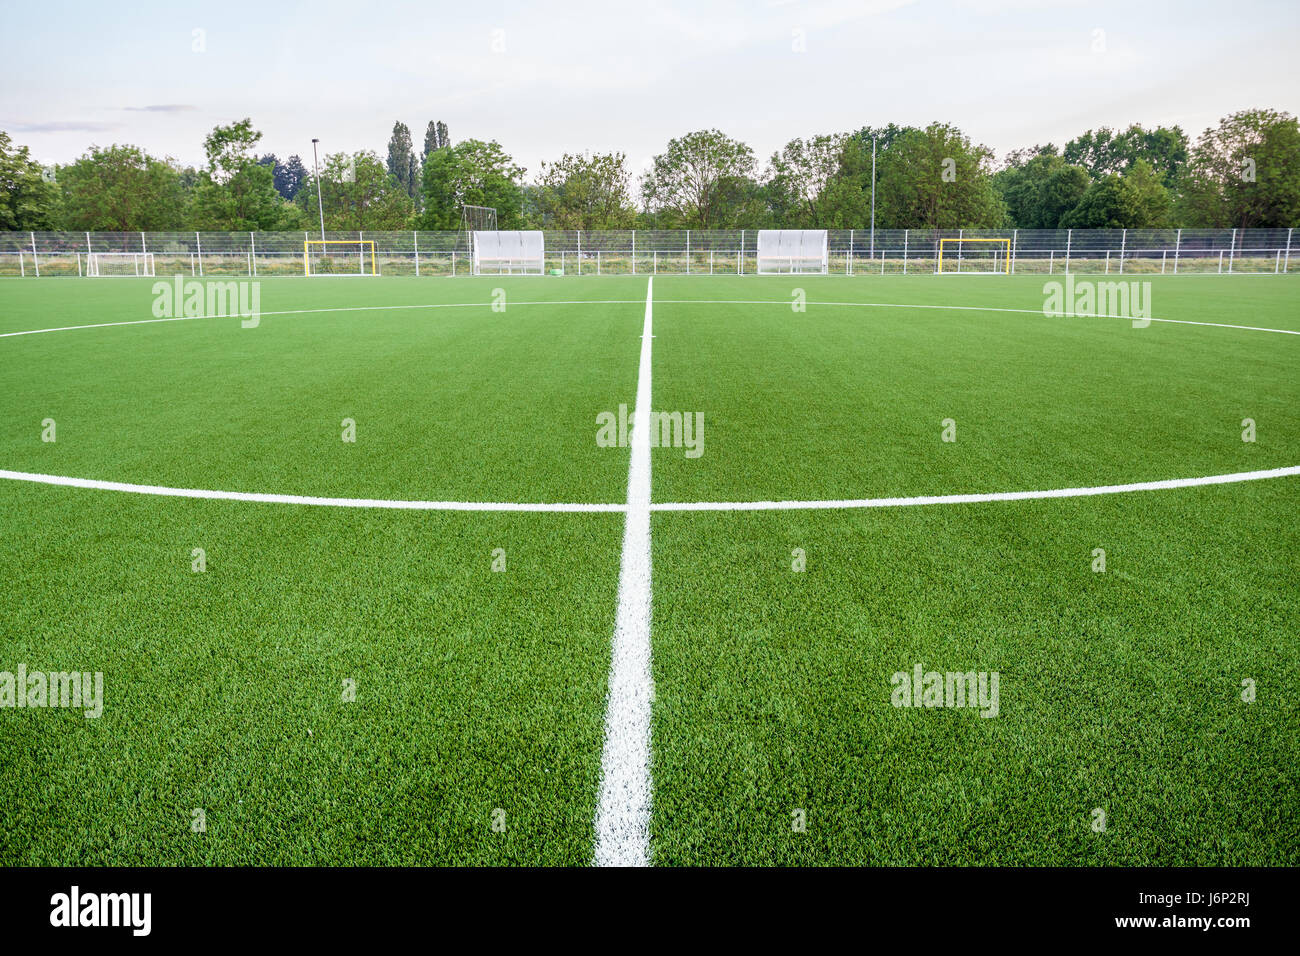 An football field with artificial turf and white lines Stock Photo